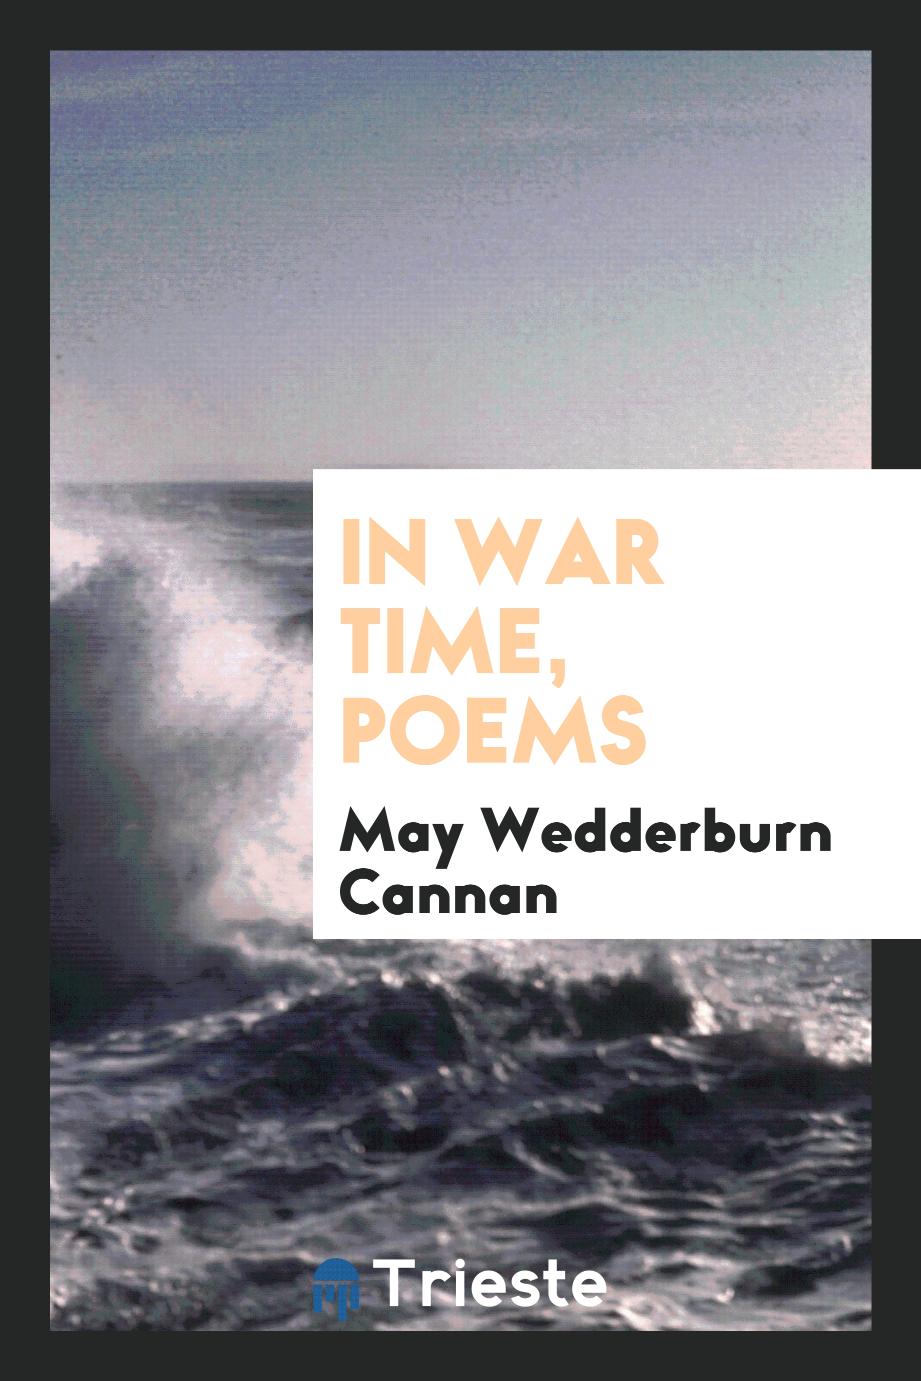 In war time, poems